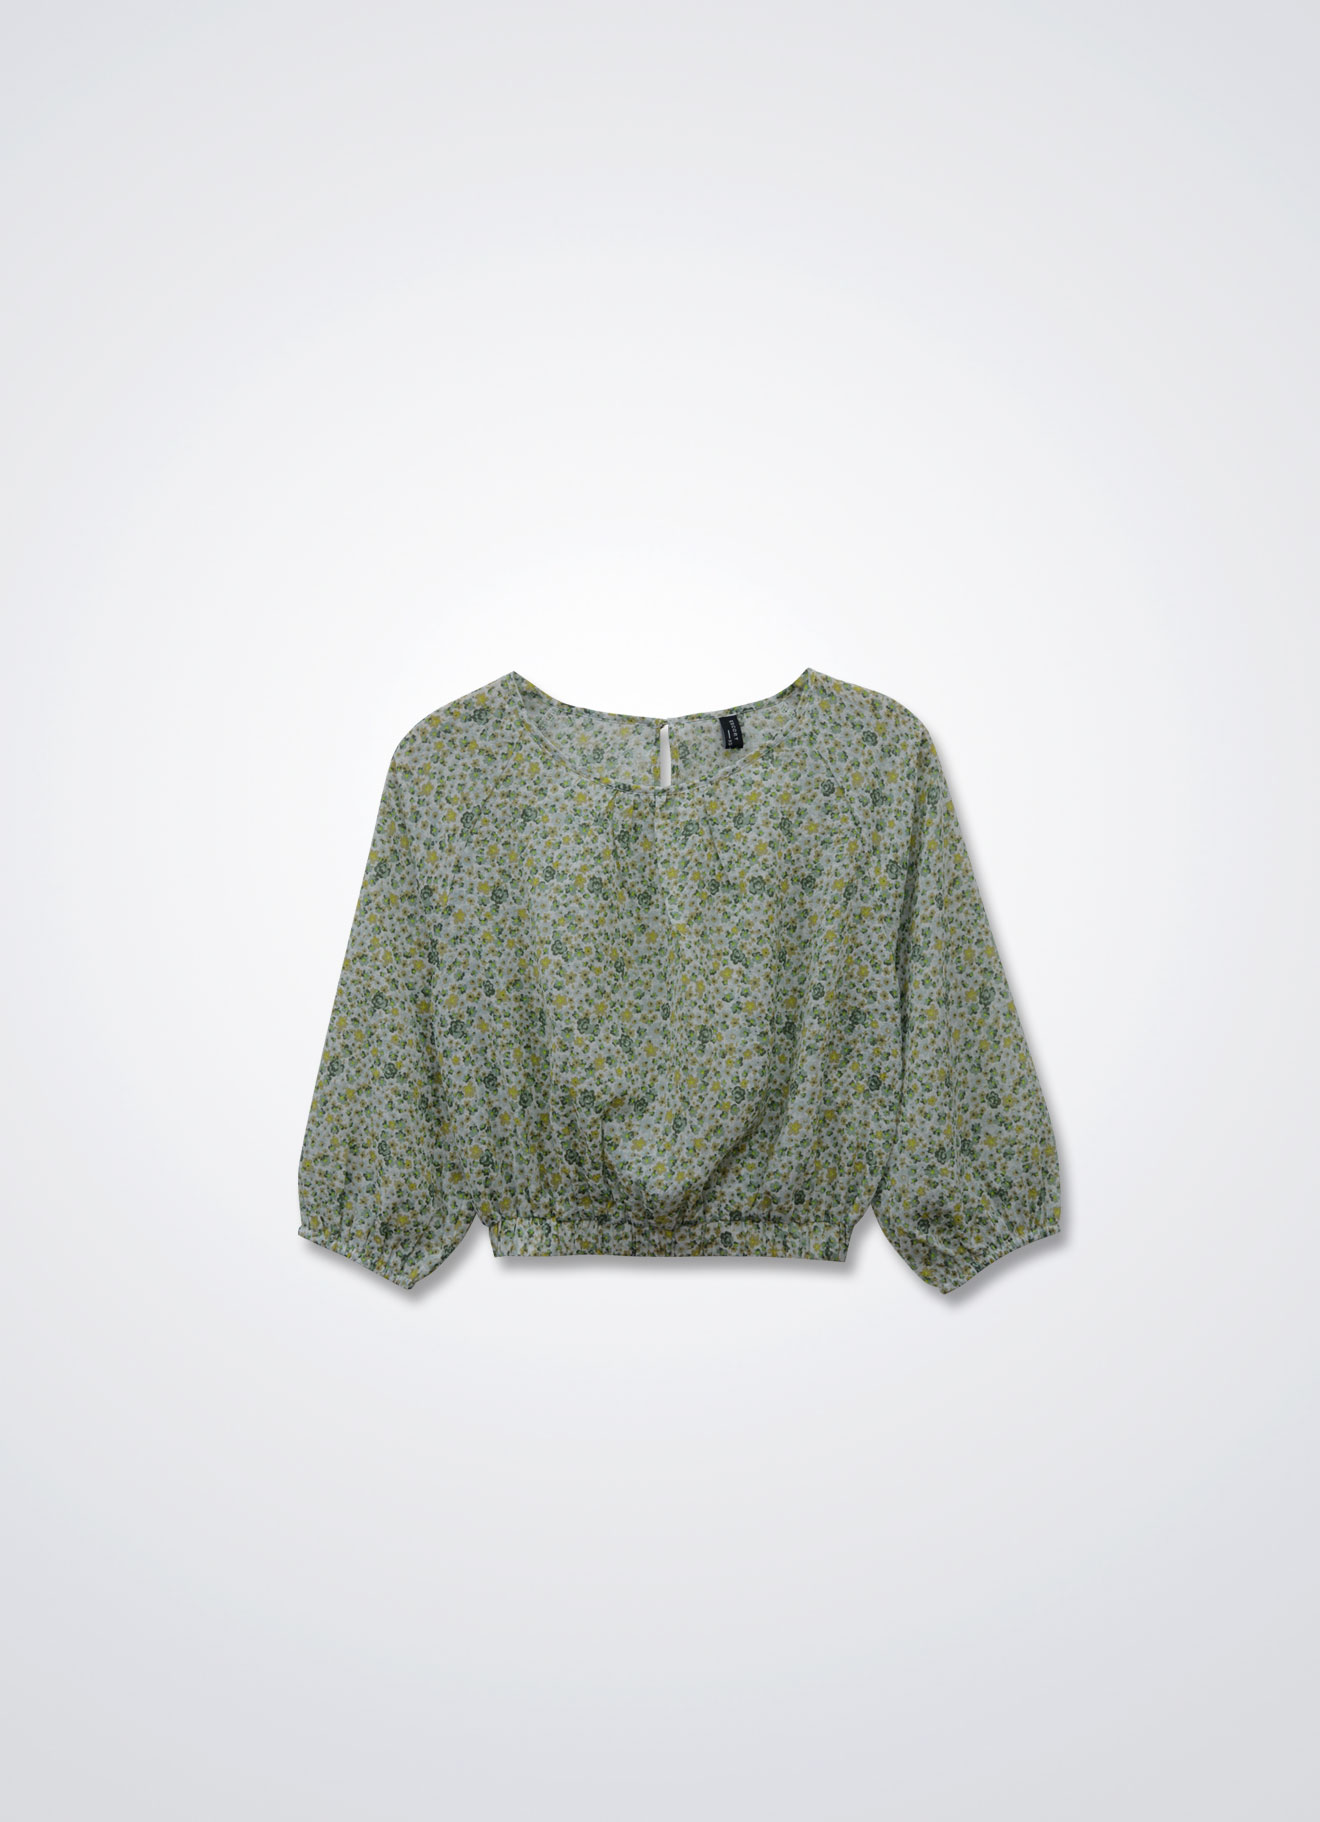 Subtle-Green by Floral Printed Blouse